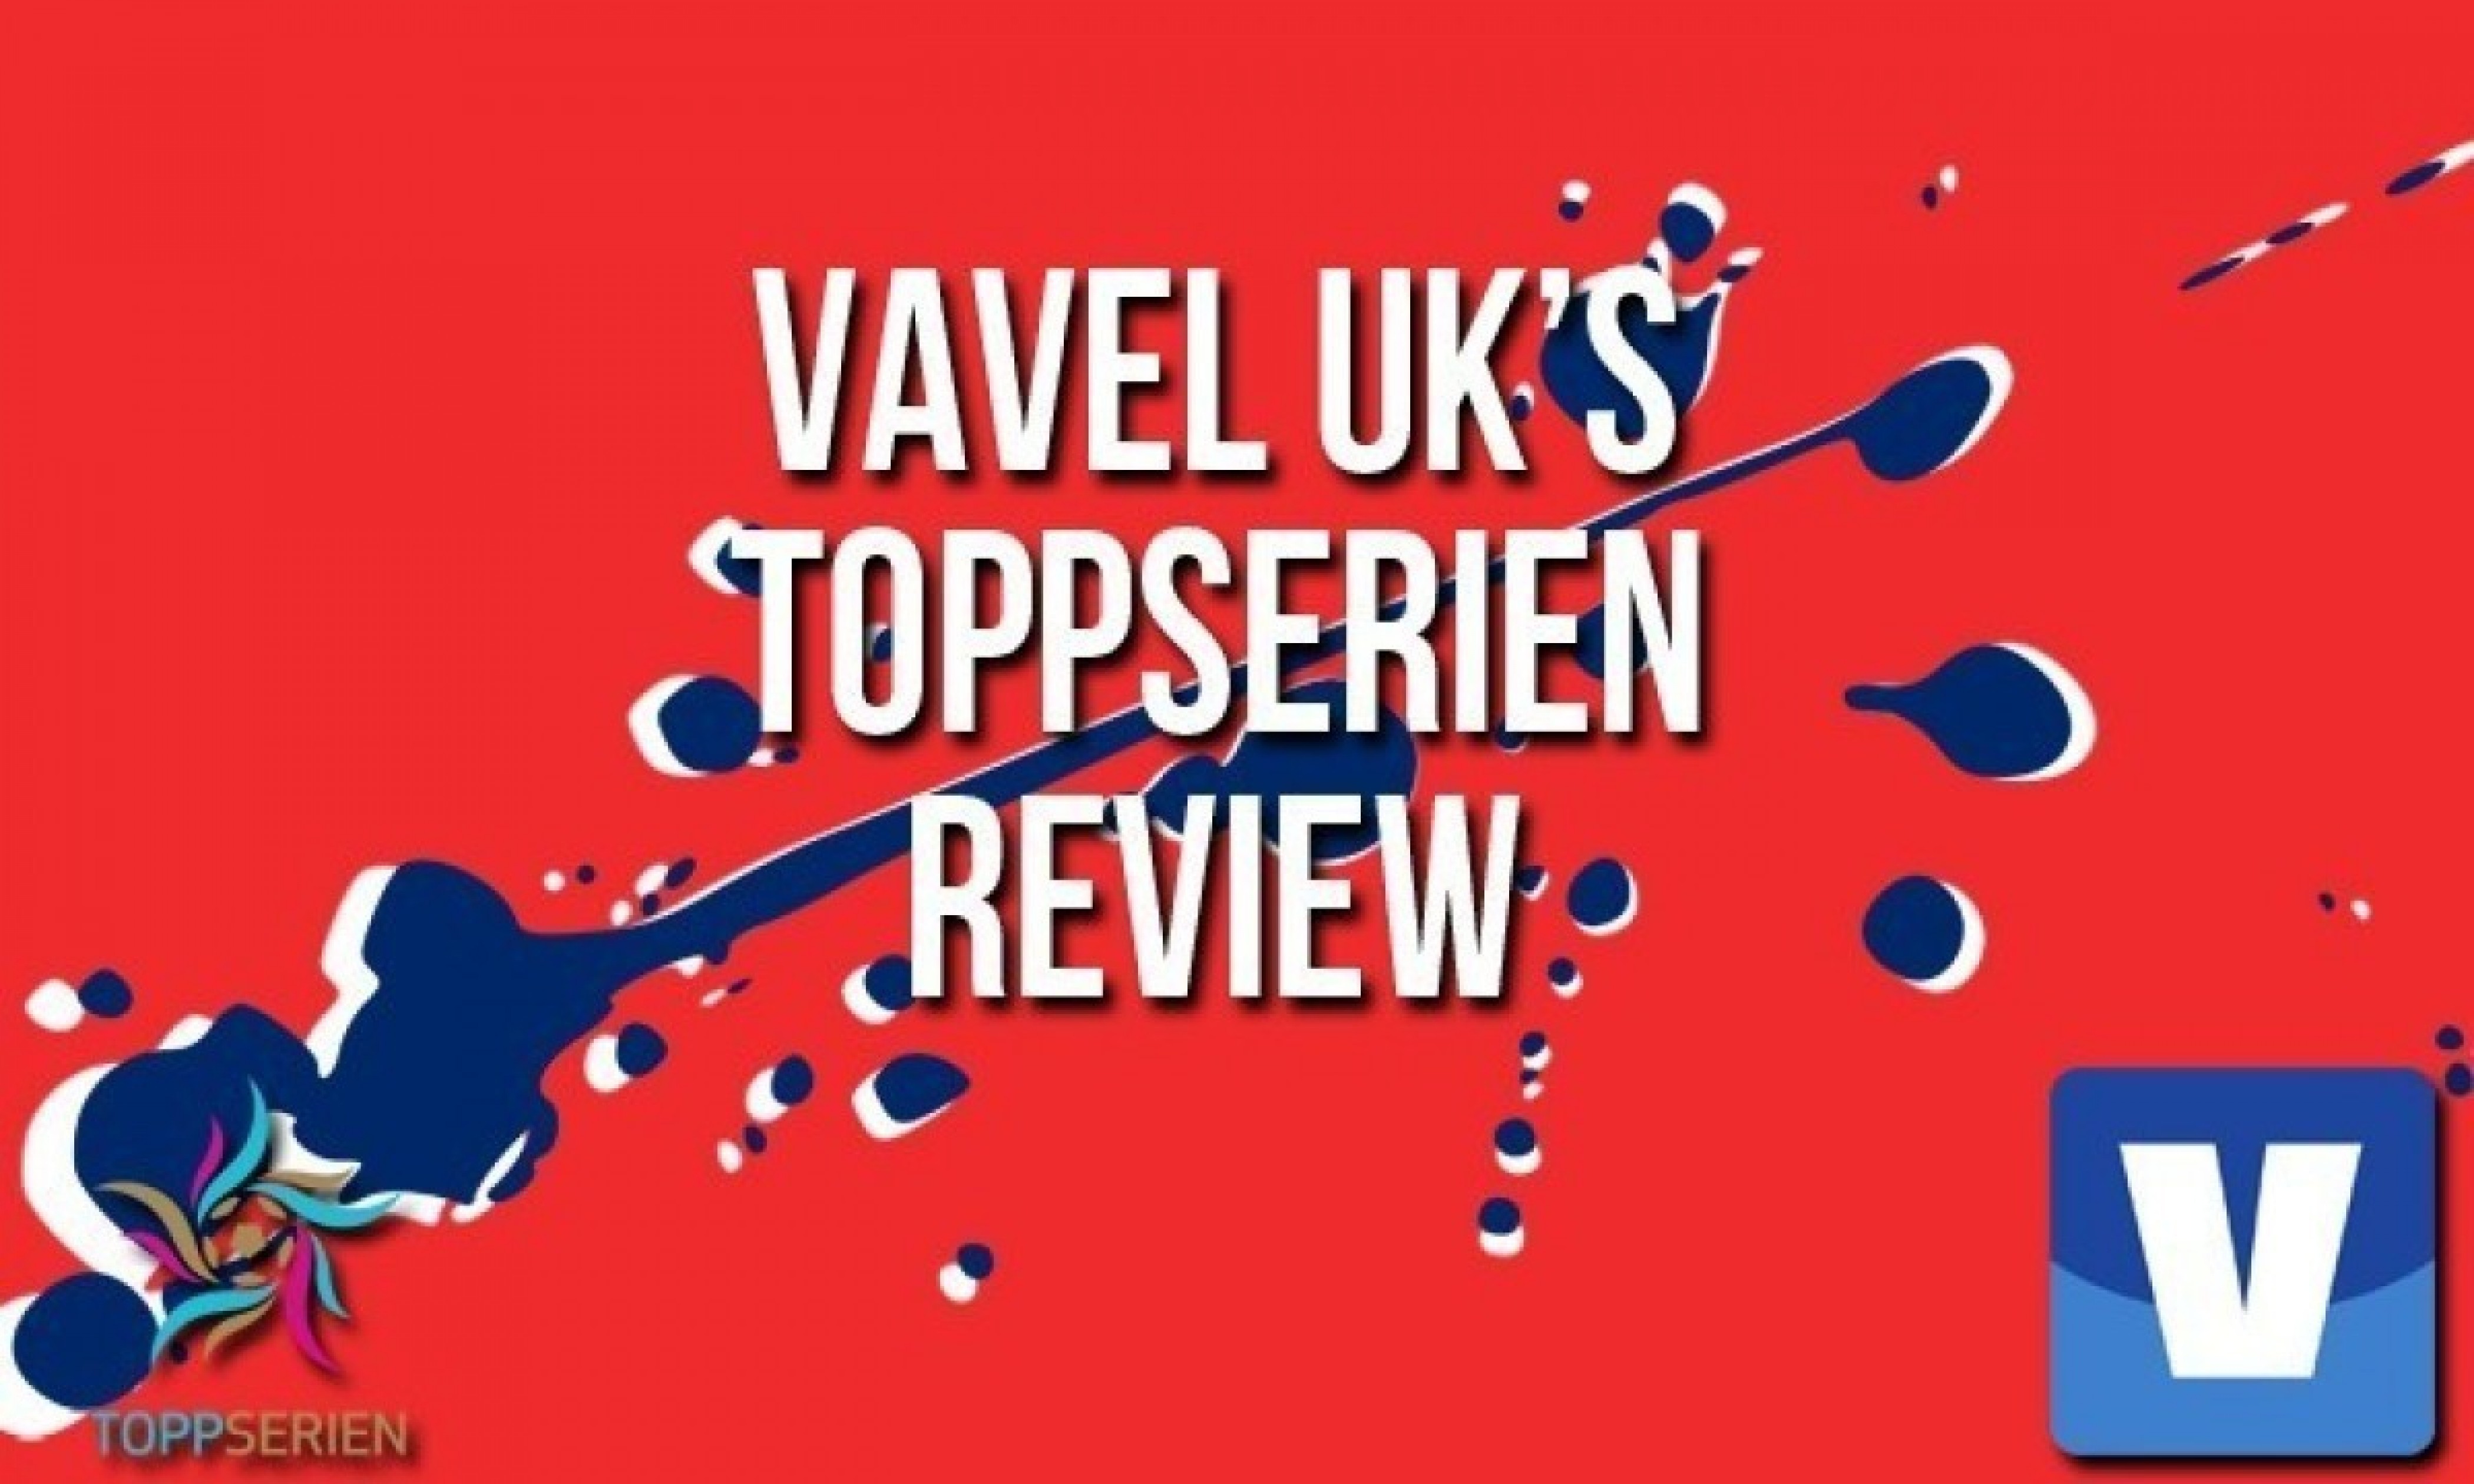 Toppserien week 18 review: Trondheims-Ørn and Sandviken tussle for a draw